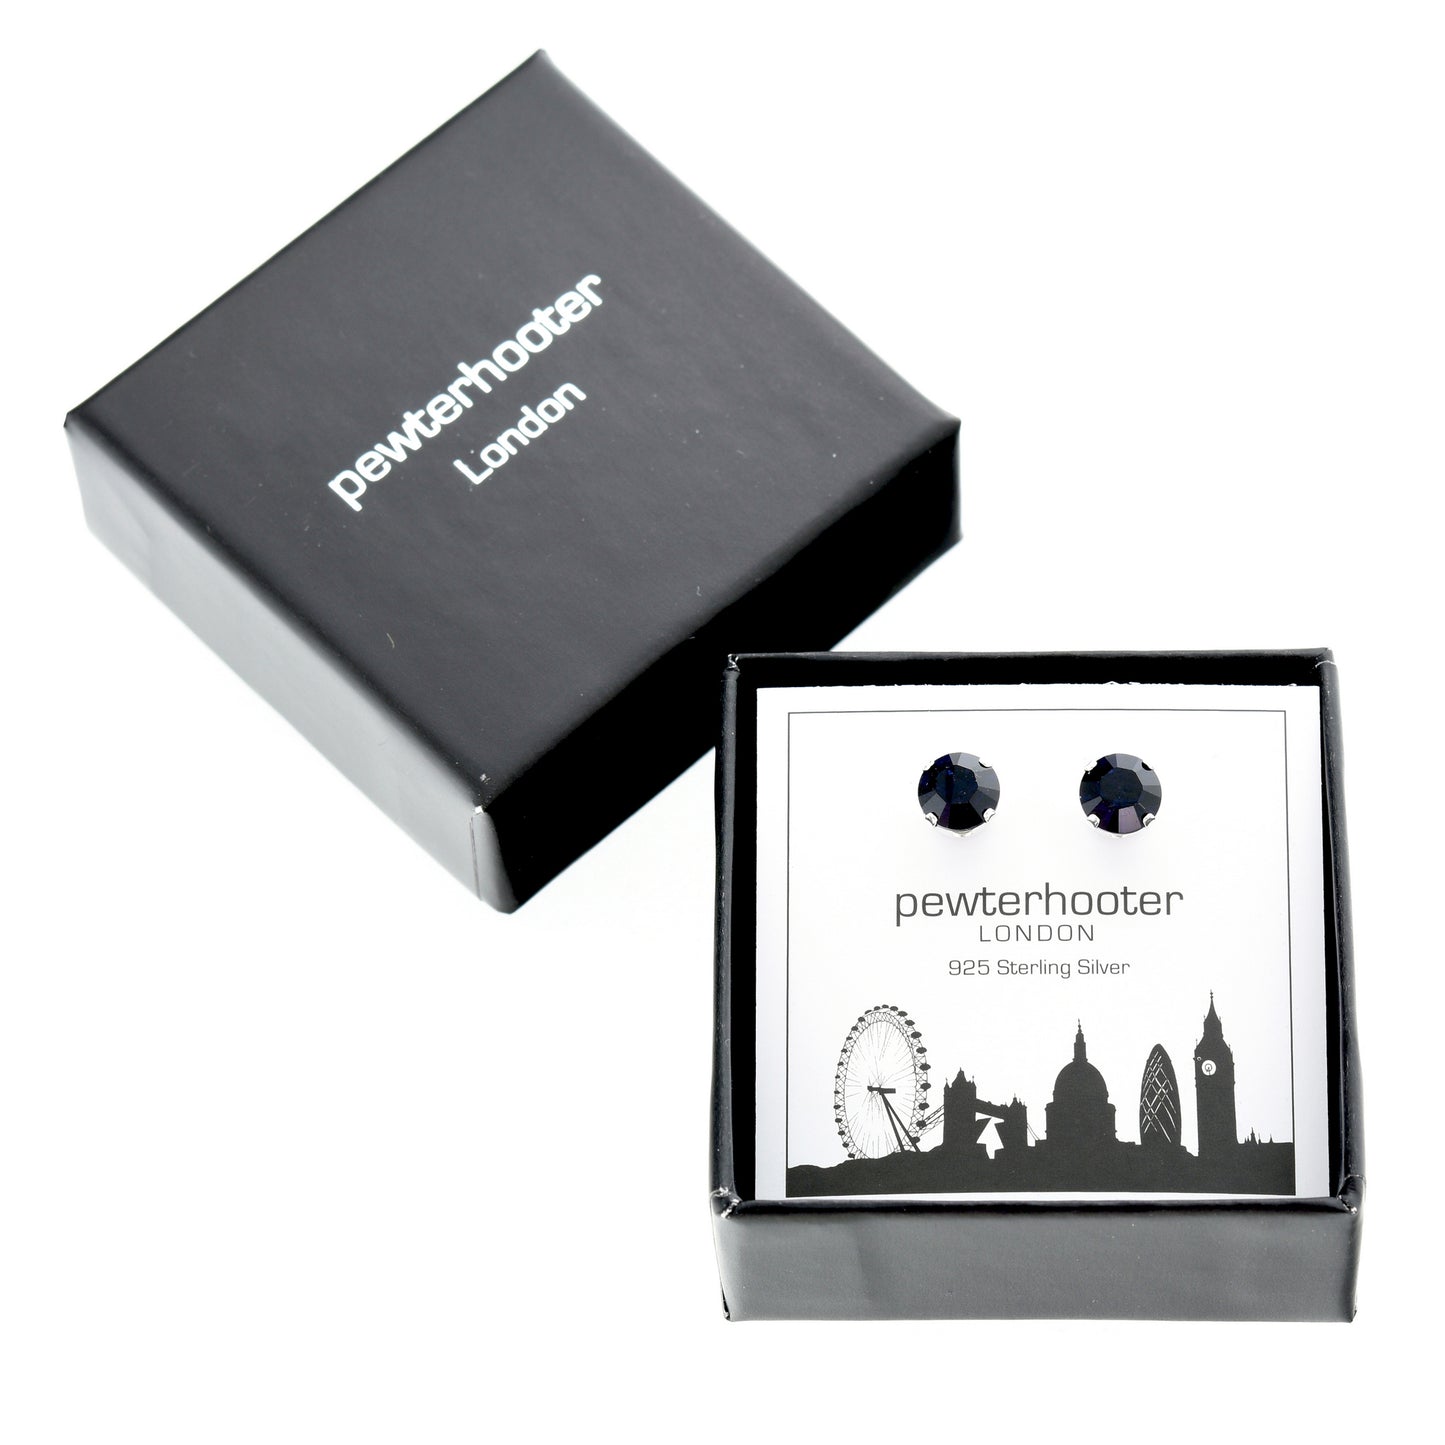 pewterhooter® Women's Classic Collection 925 Sterling silver earrings with sparkling Indigo Blue crystals, packaged in a gift box for any occasion.